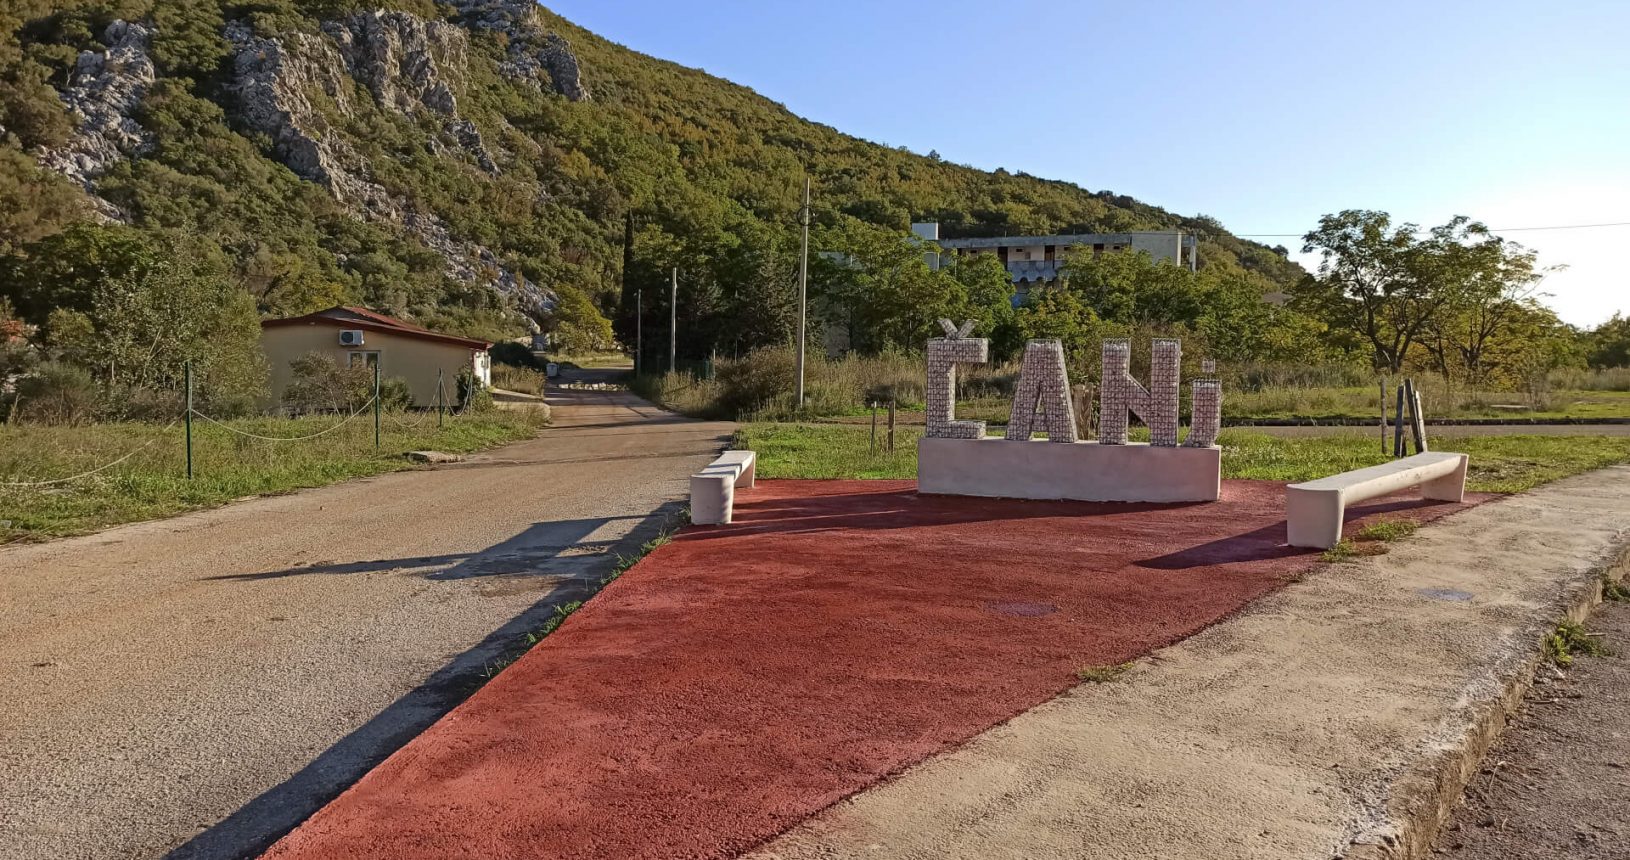 The entrance to Canj